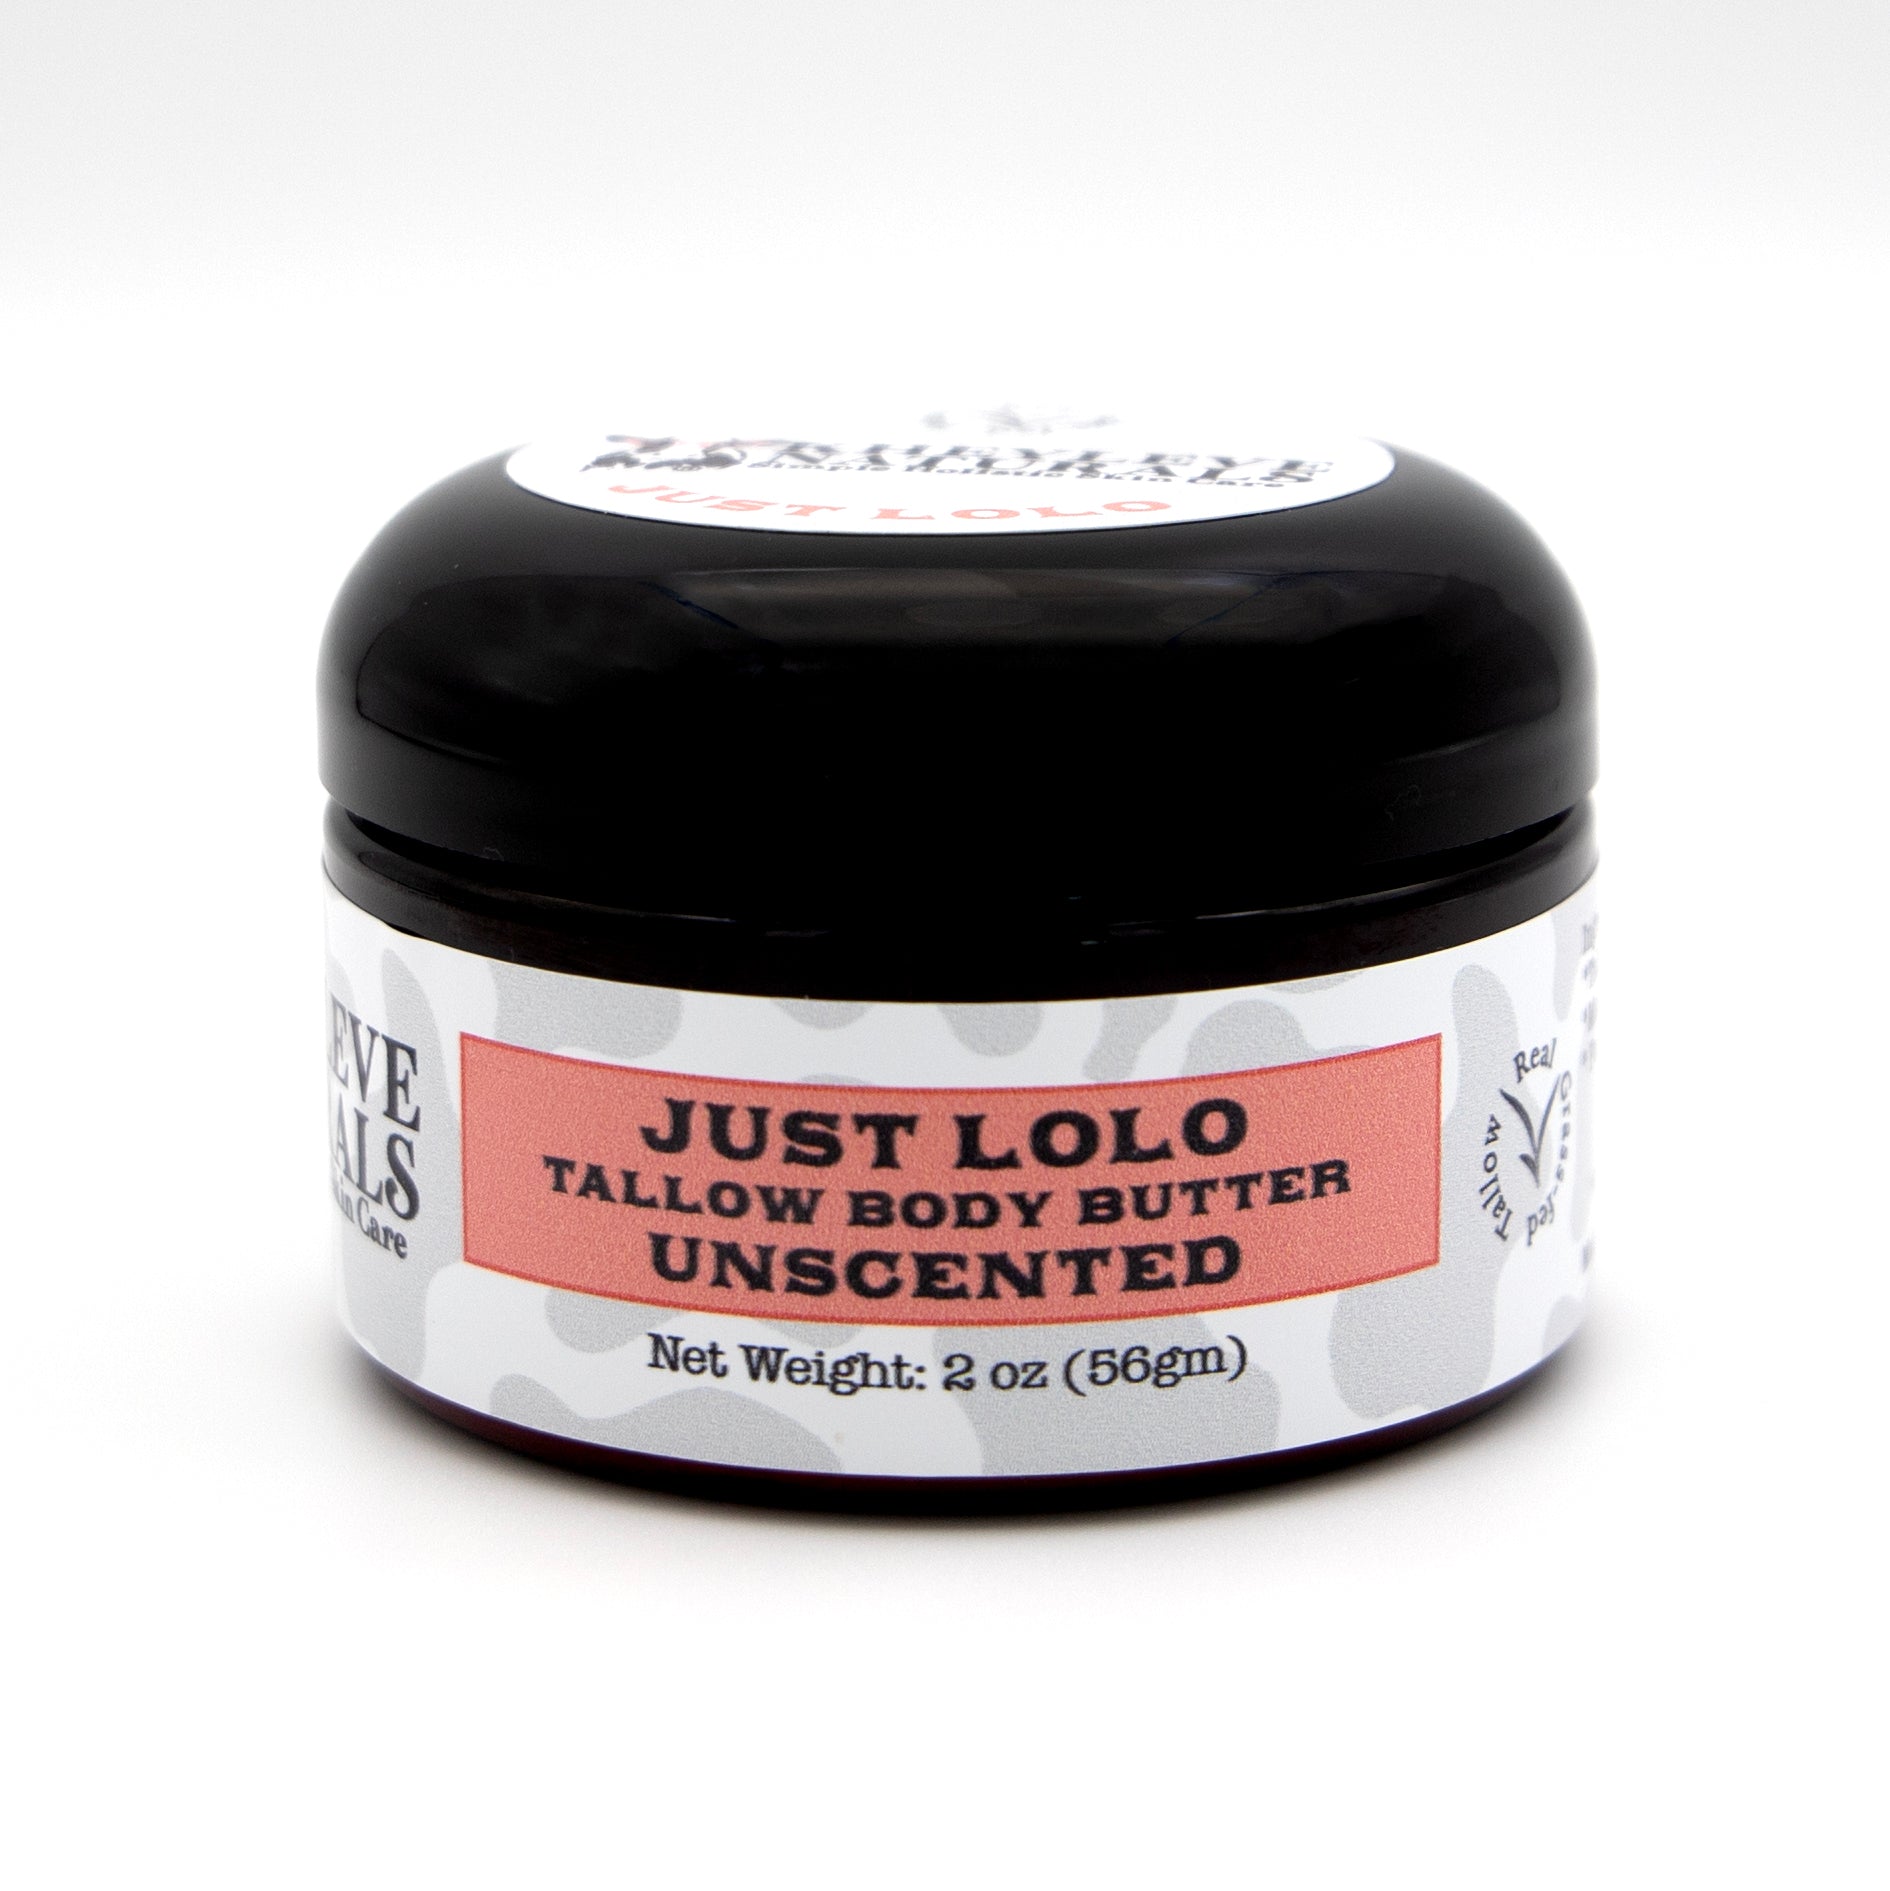 Just Lolo is the best body butter for EVERYONE and especially for those who have sensitive skin, and little ones. Our organic and natural ingredients are safe for delicate skin, and its unscented formula makes it ideal for all skin types.